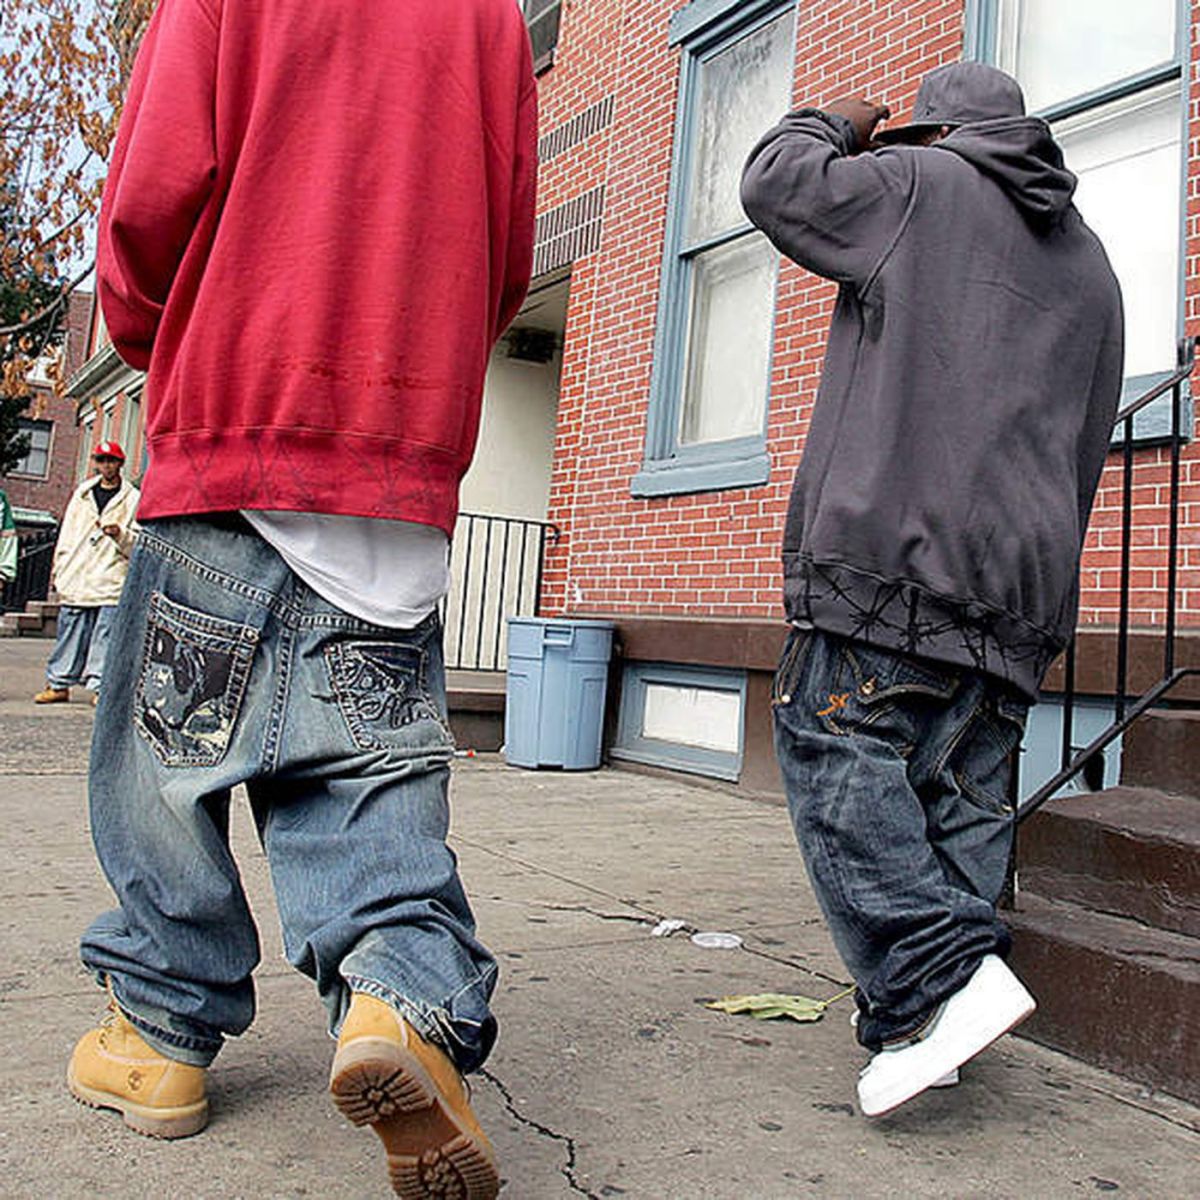 Saggy trousers banned from US town